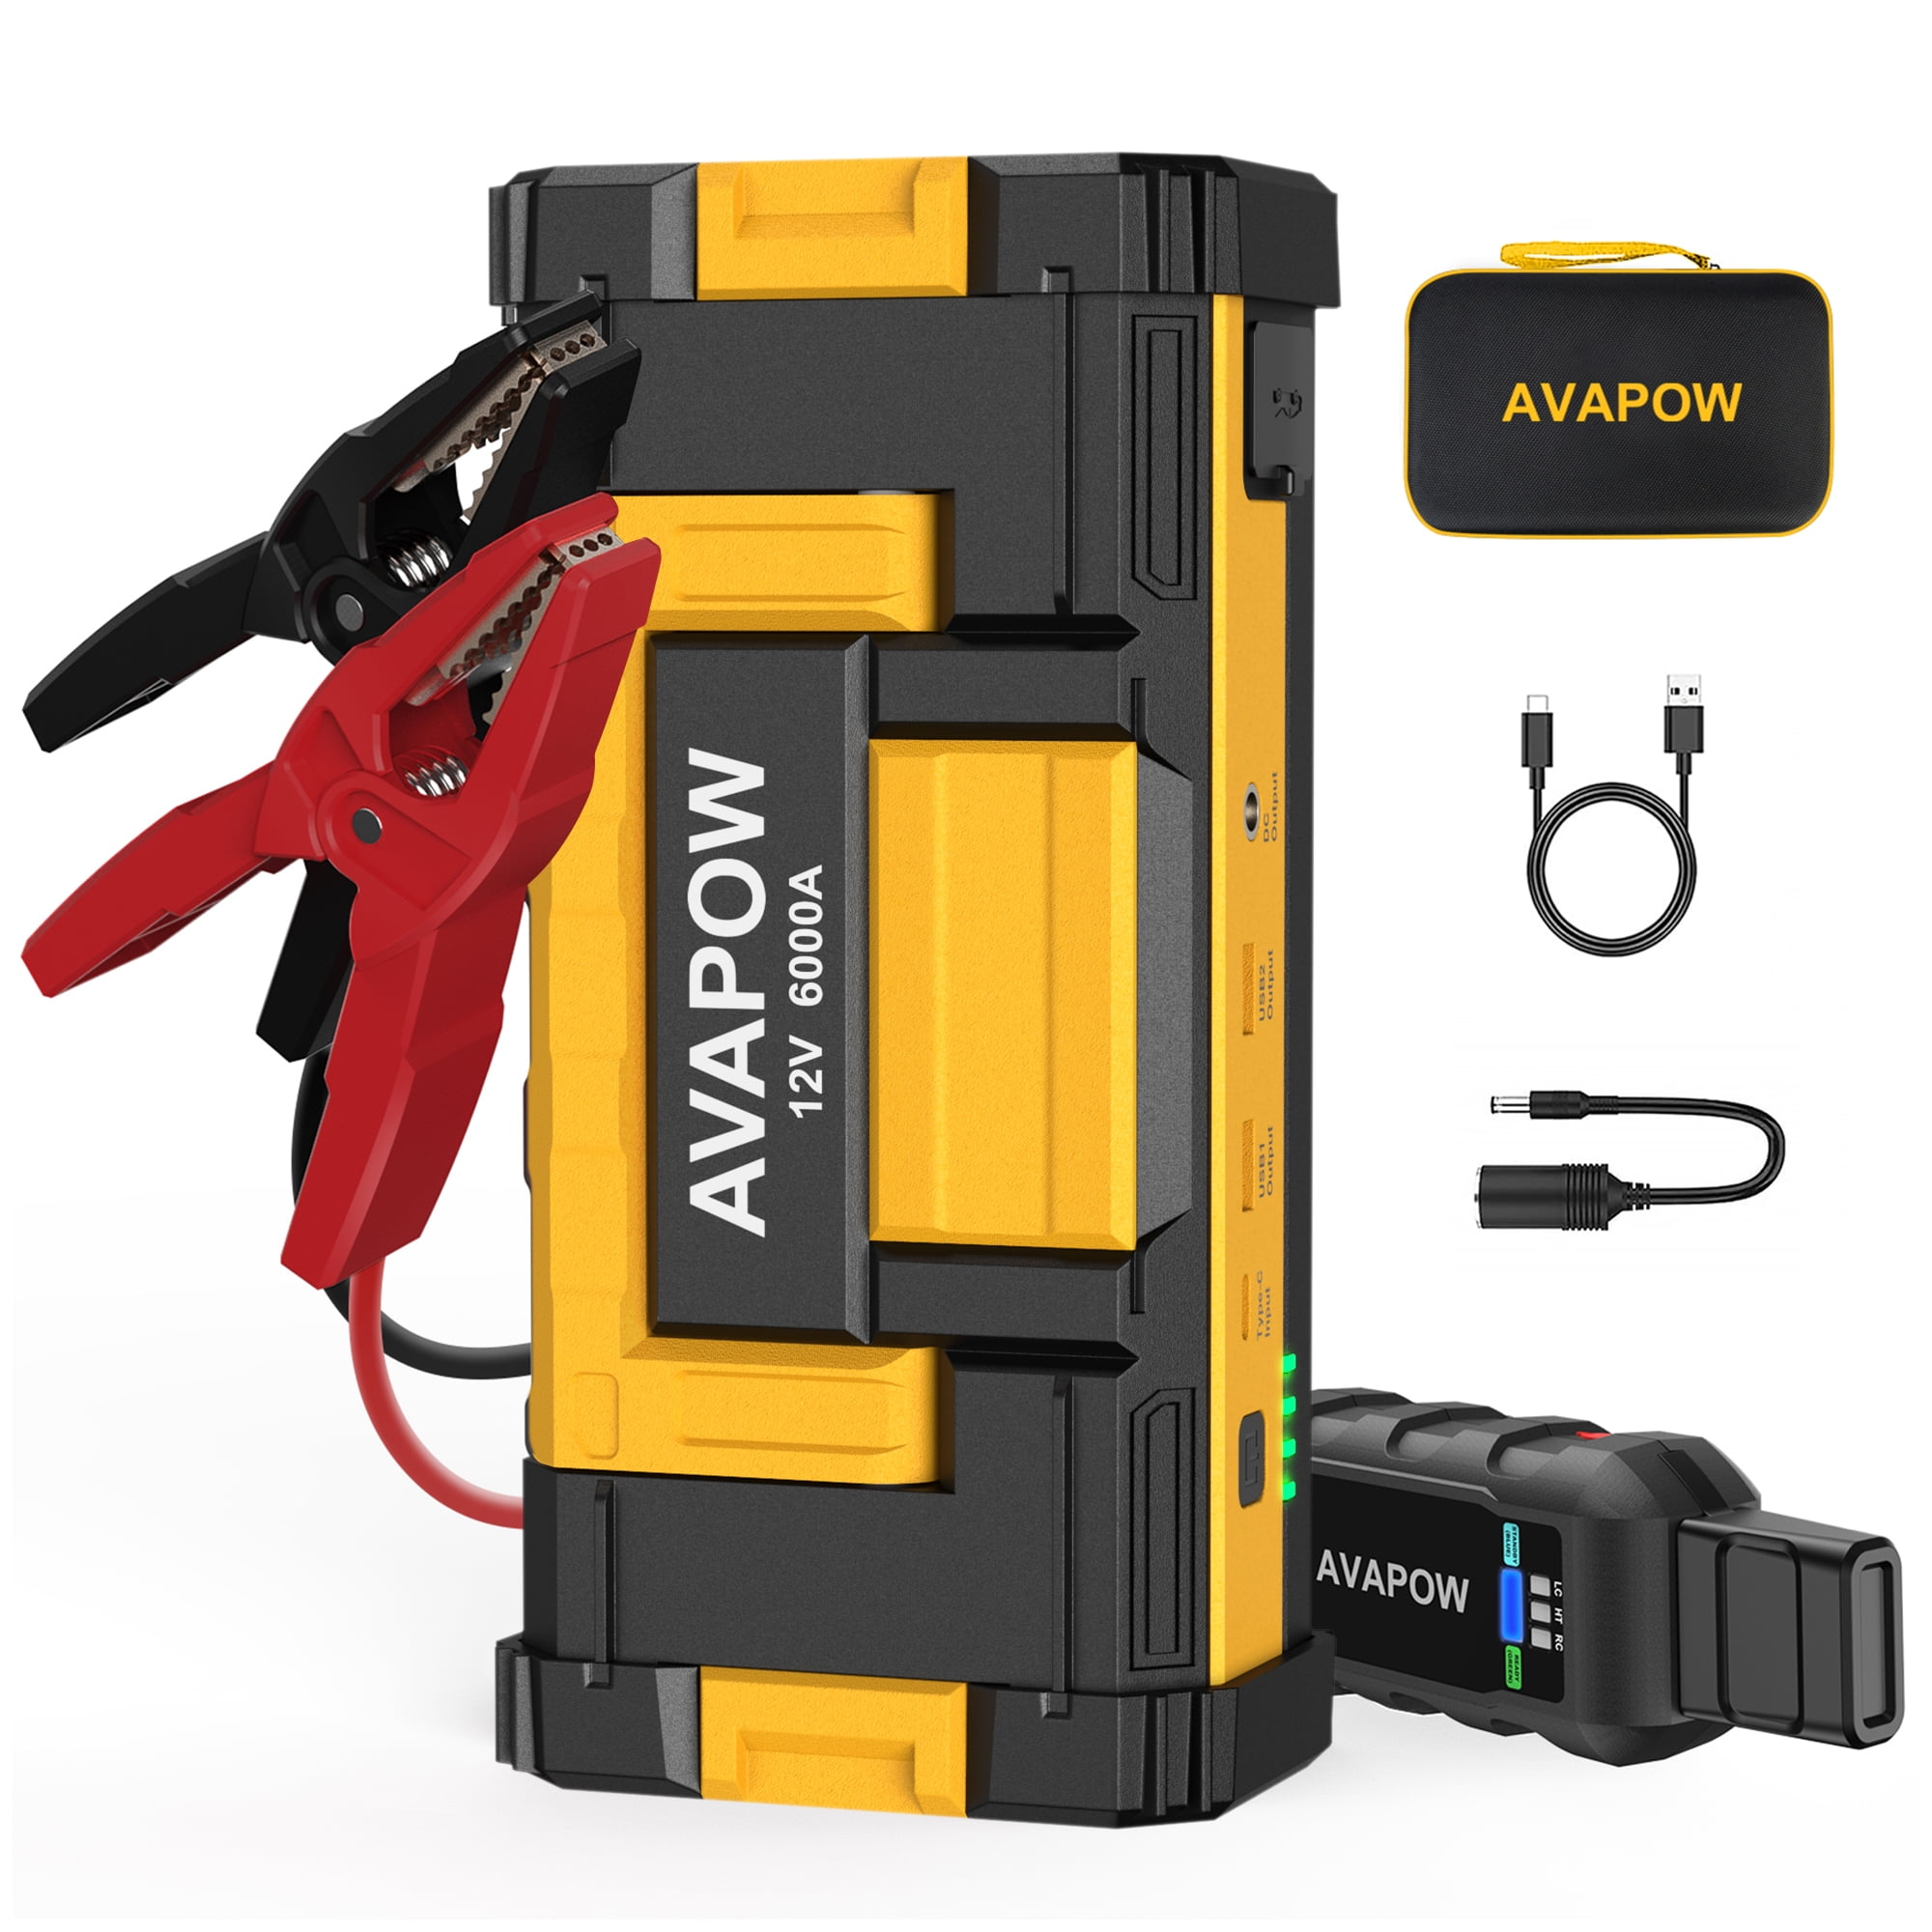 Don't Pay $100, Get a AVAPOW 3000A Peak Car Battery Jump Starter That  Doubles as USB Power Bank for $69.59 Shipped - Today Only - TechEBlog